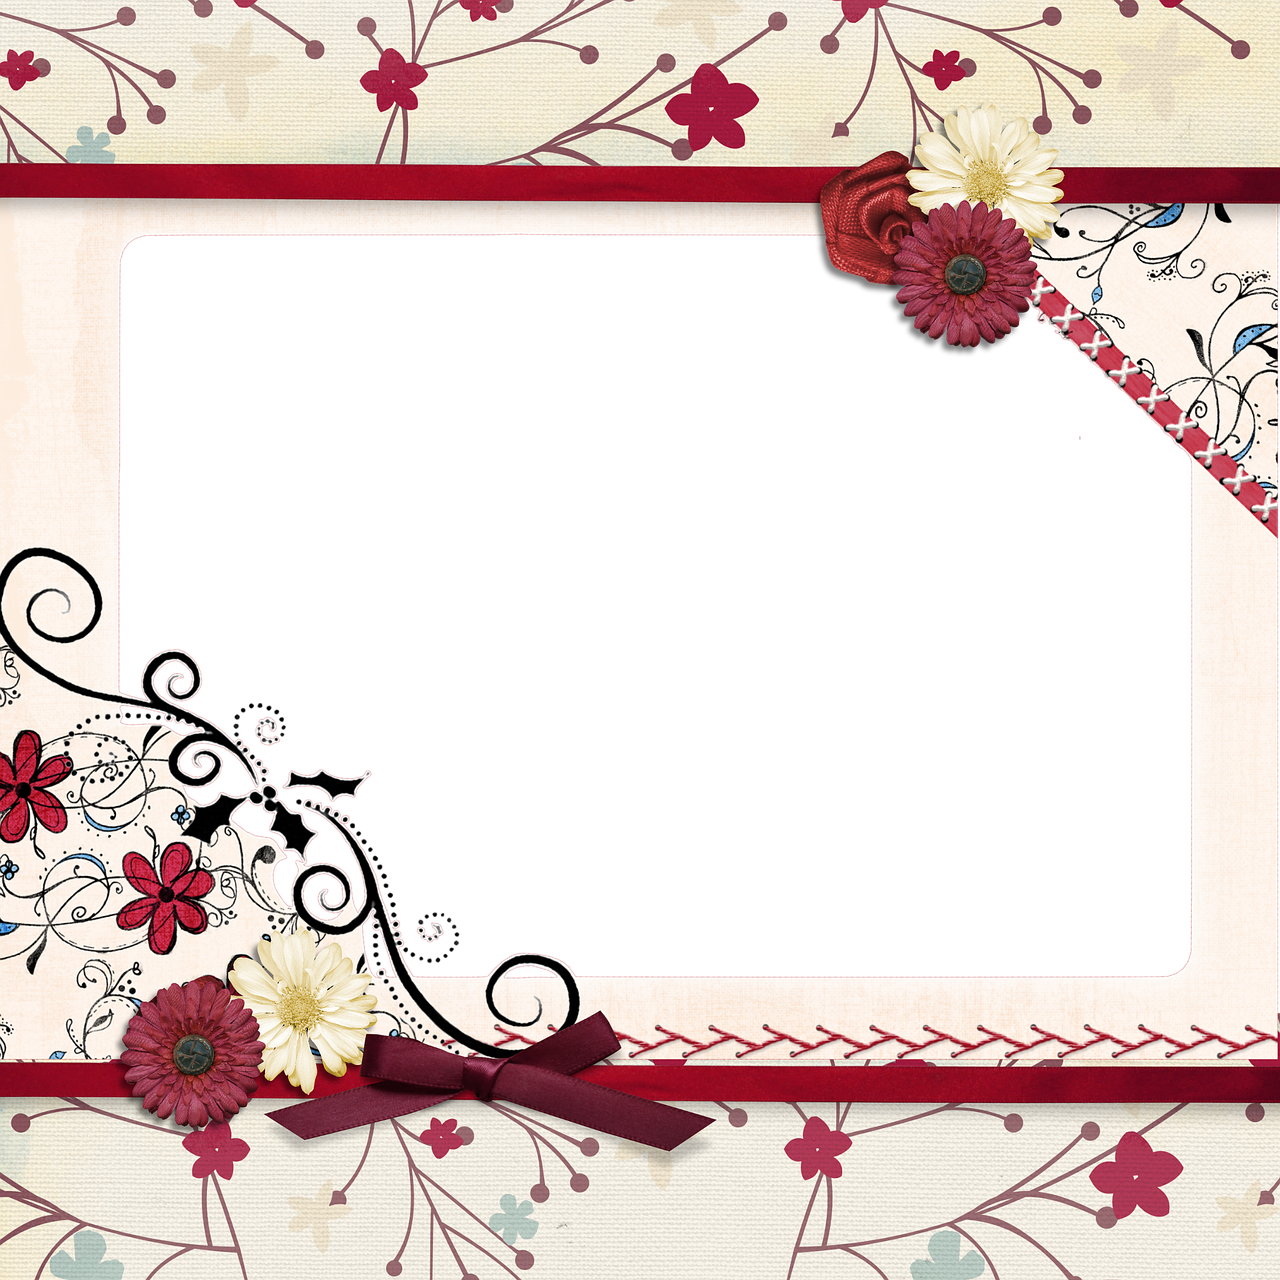 a picture frame with flowers and a ribbon, inspired by Cindy Wright, tumblr, red + black + dark blue + beige, detailed backgrounds, elegant asymmetrical, blackboard